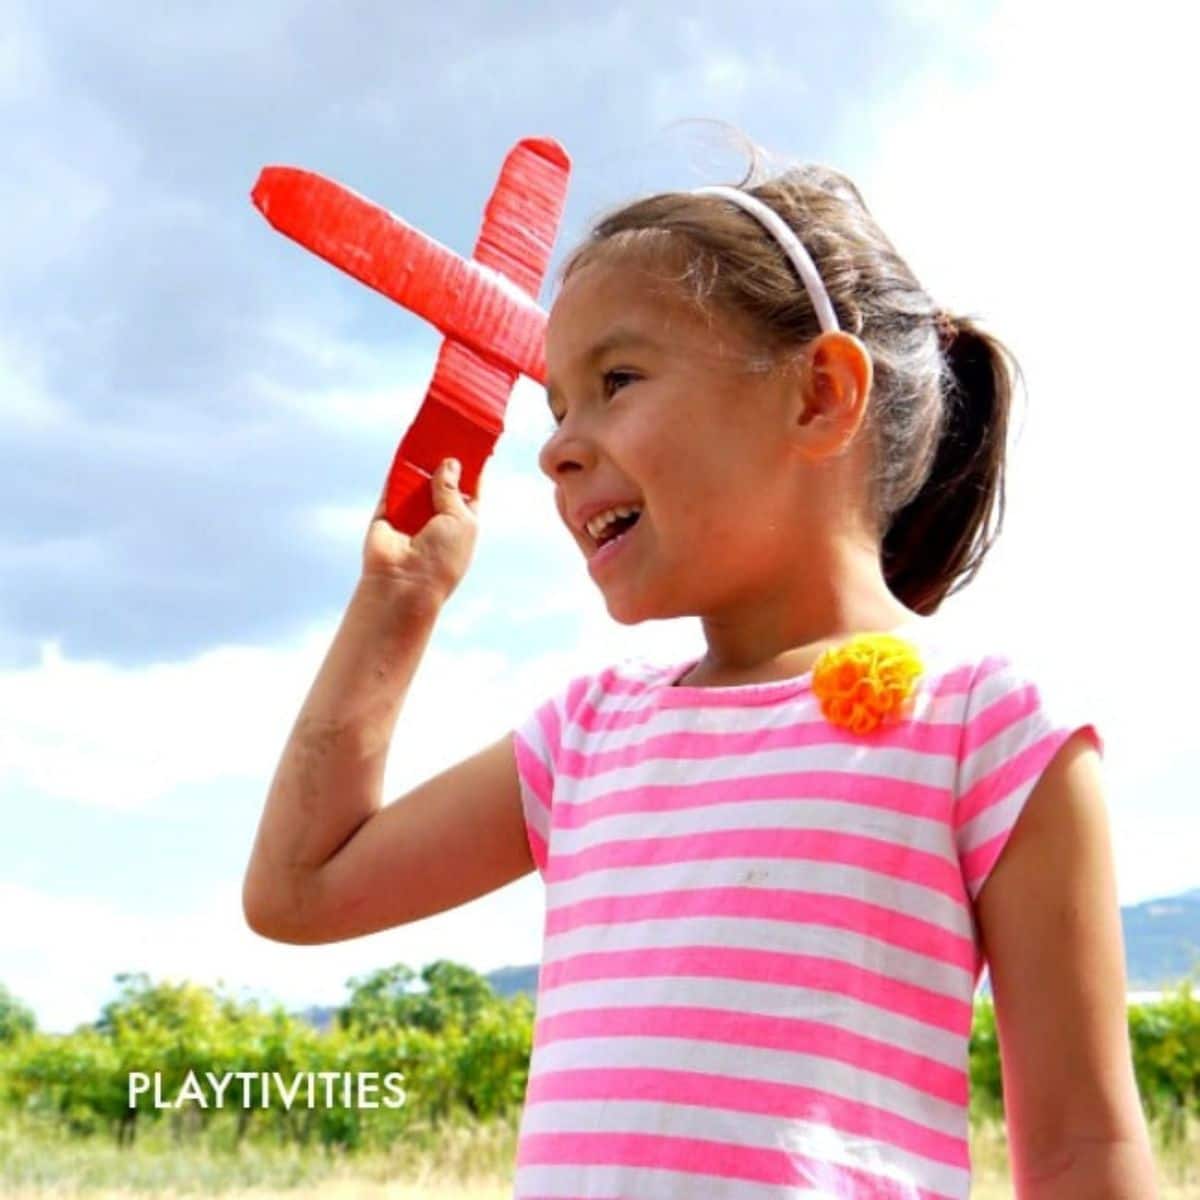 Young girl holding a red homemade boomerang.